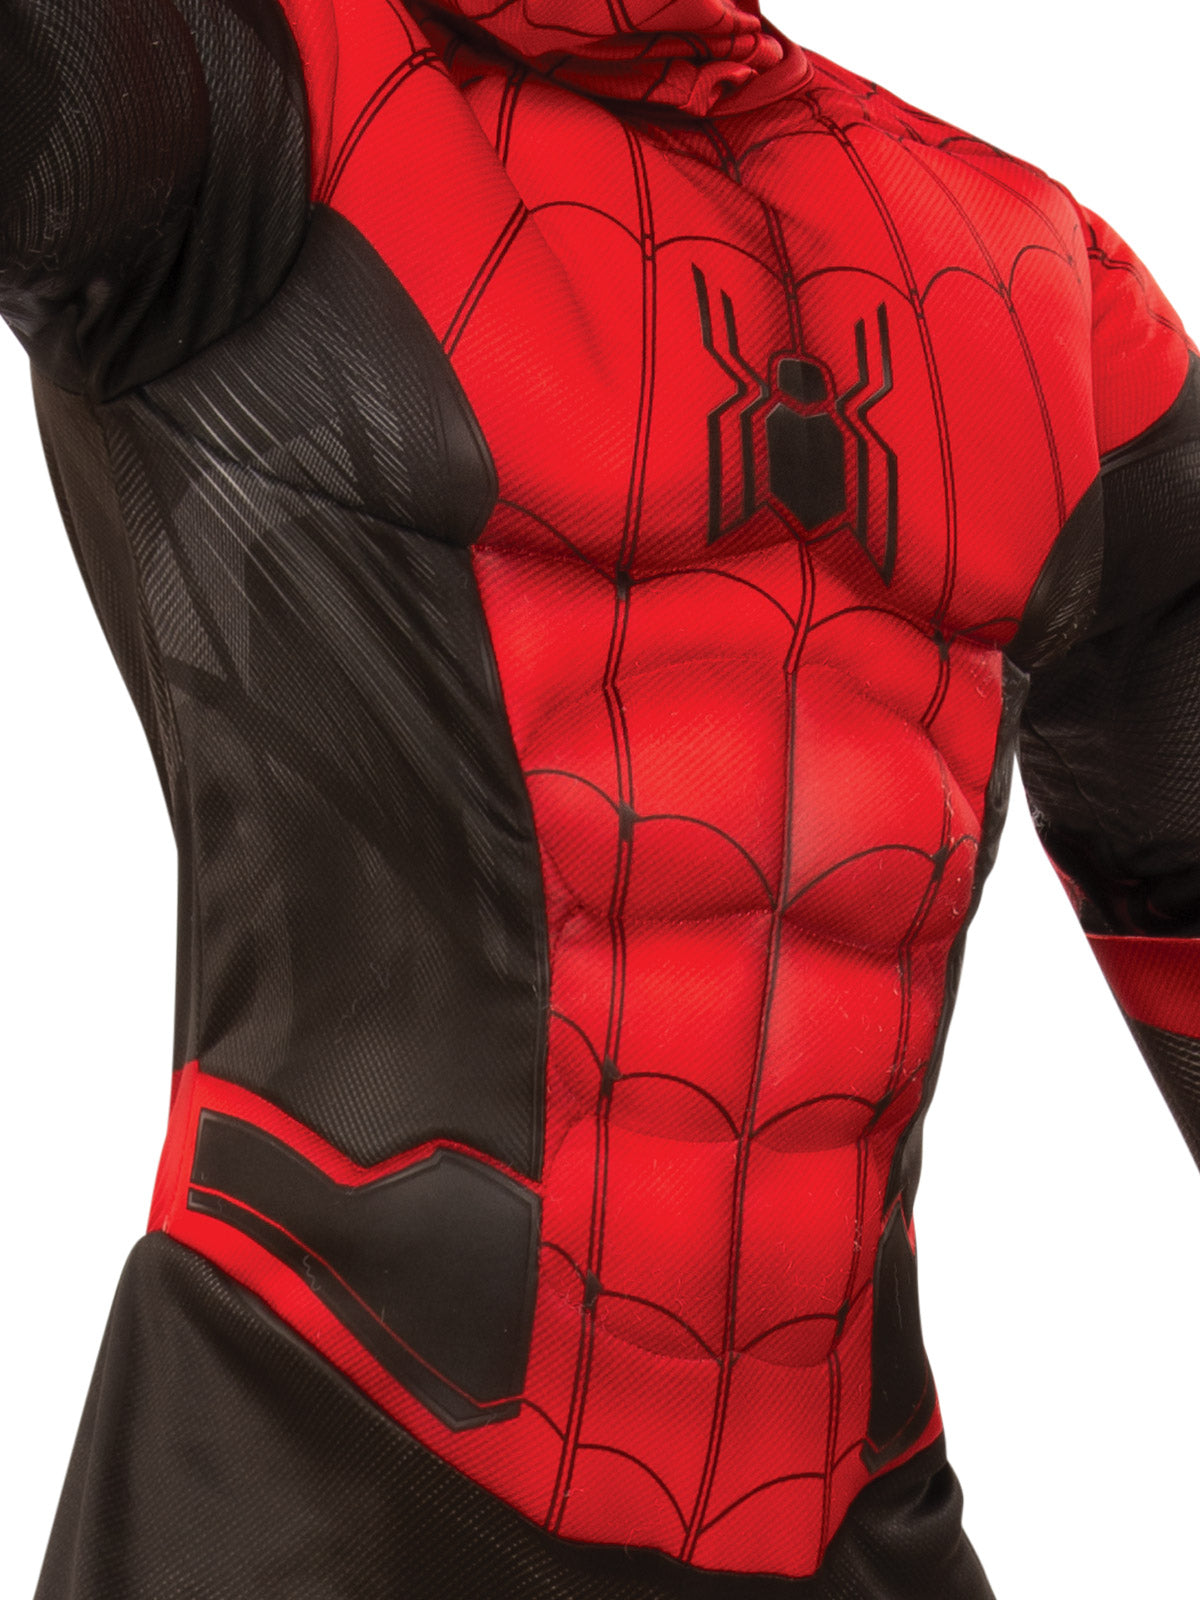 Spiderman No Way Home Deluxe Red and Black Boys Child Costume Marvel Licensed